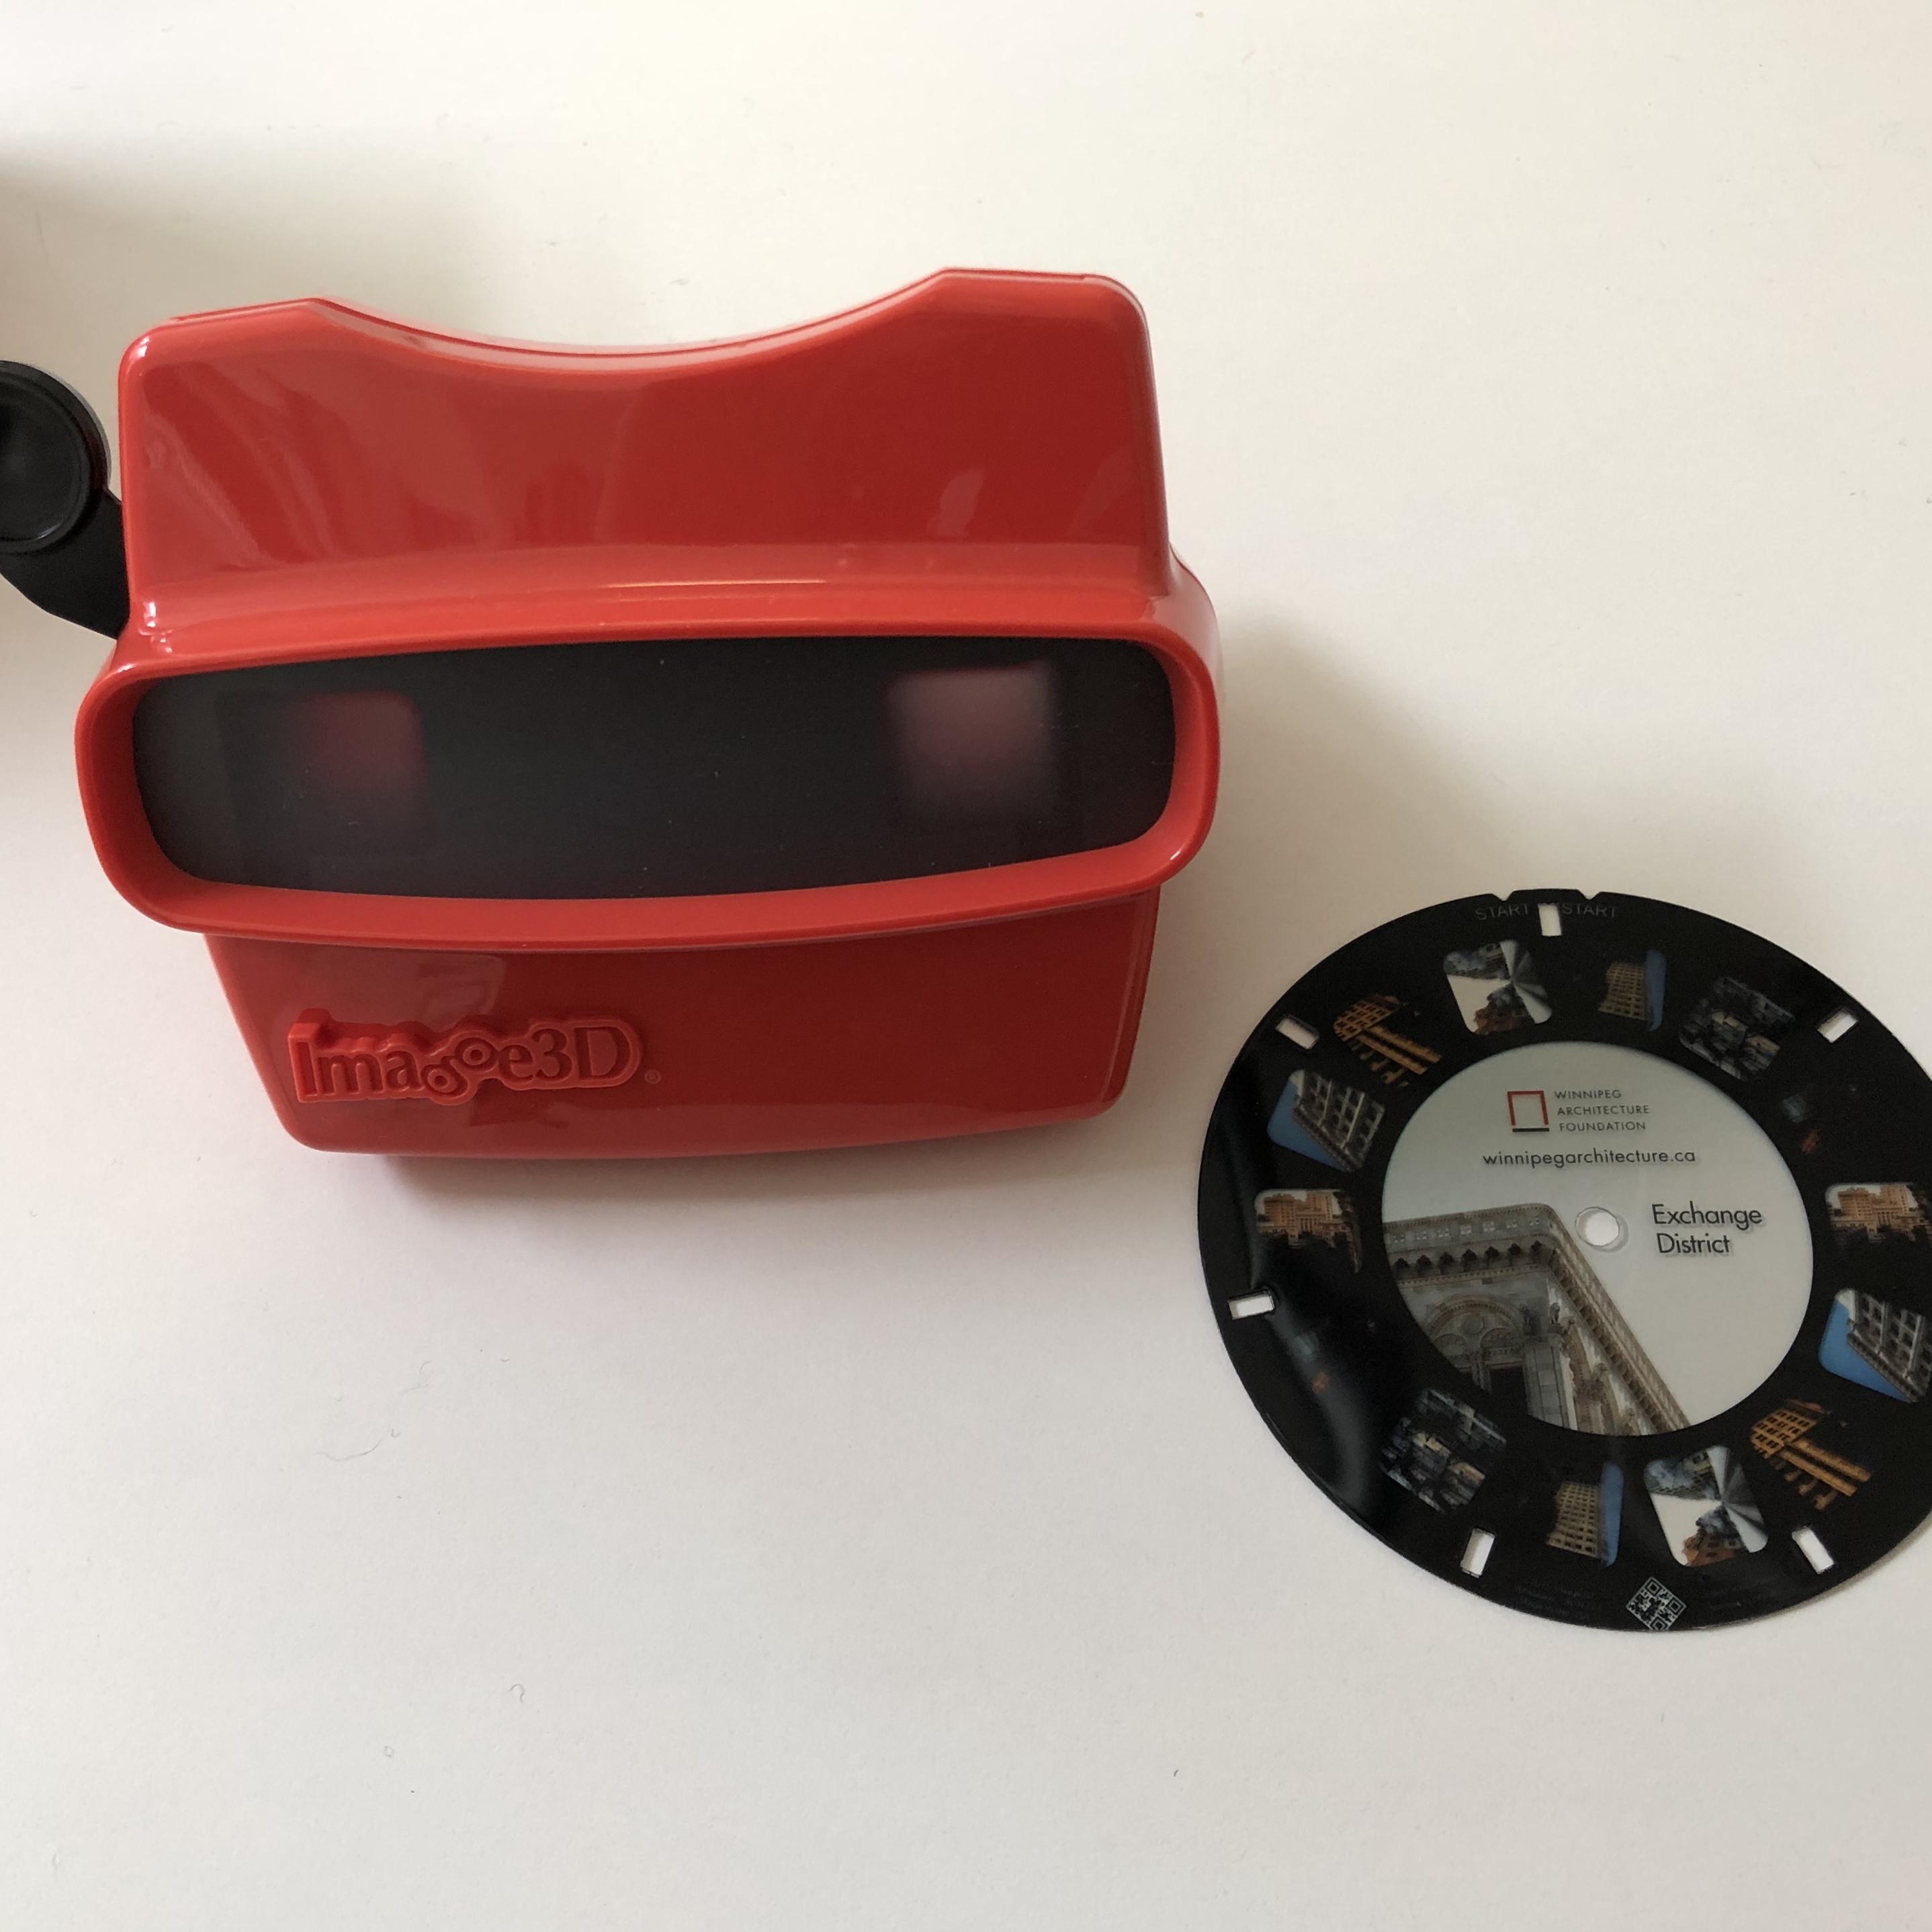 Exchange District Viewmaster